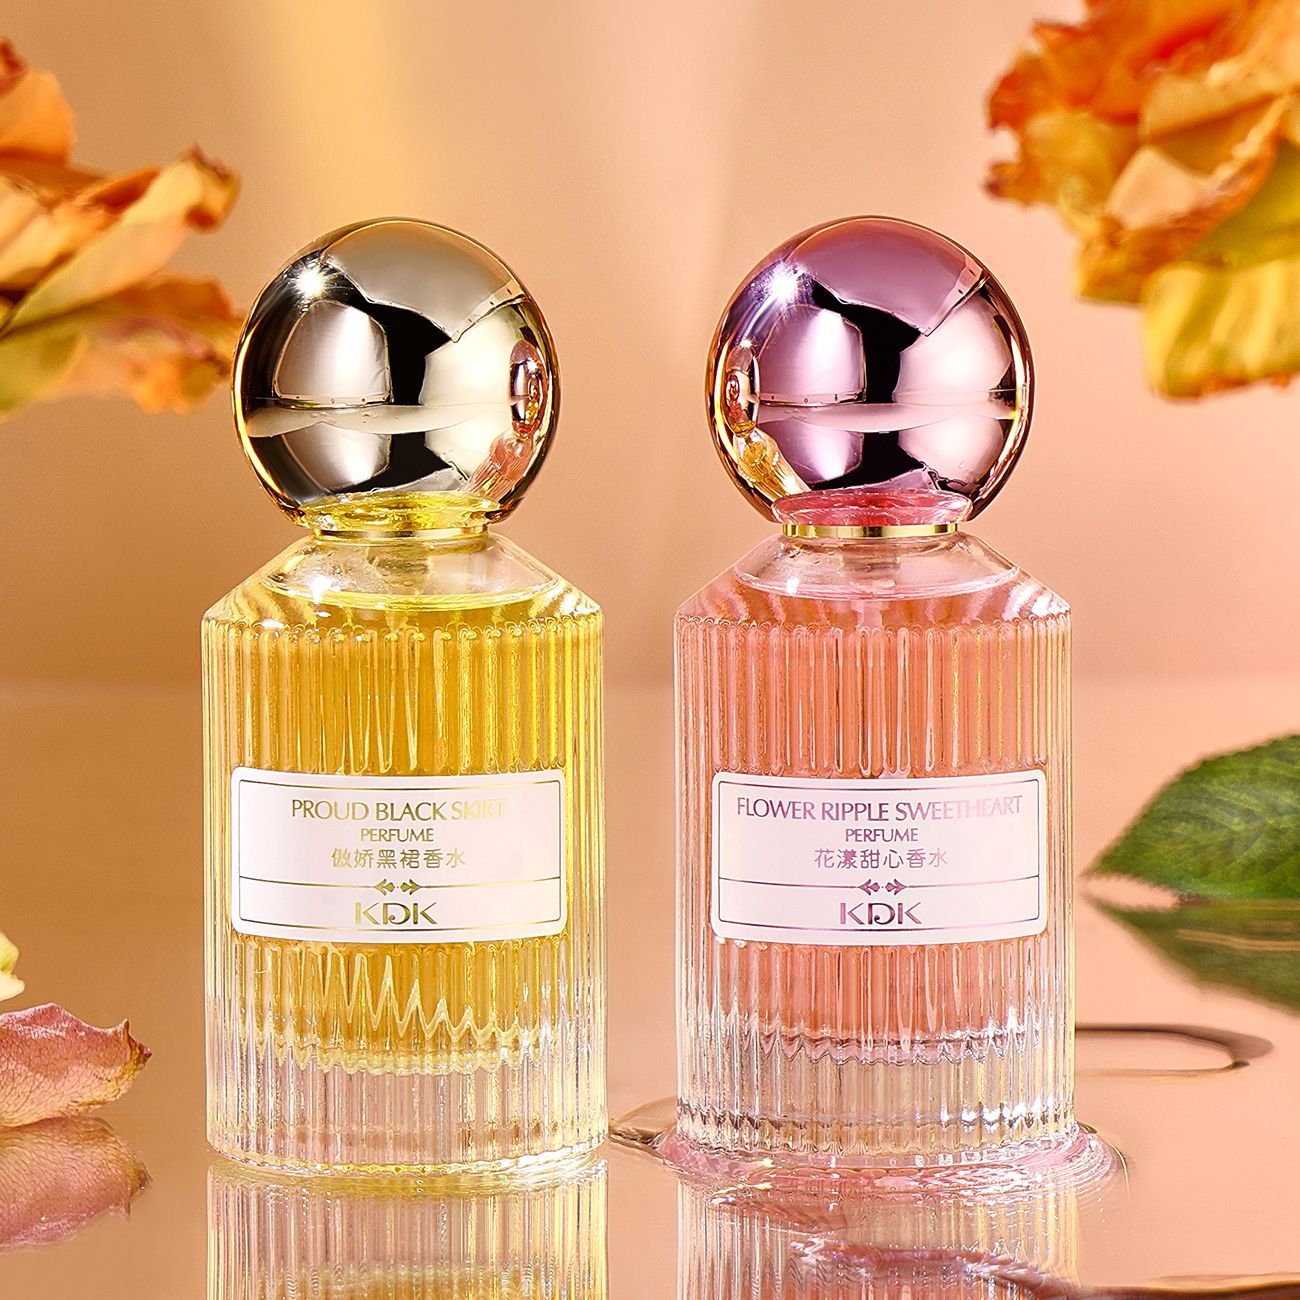 It smells good! Clothes fragrance perfume floral and fruity garden perfume ladies long-lasting light fragrance niche long-lasting fragrance